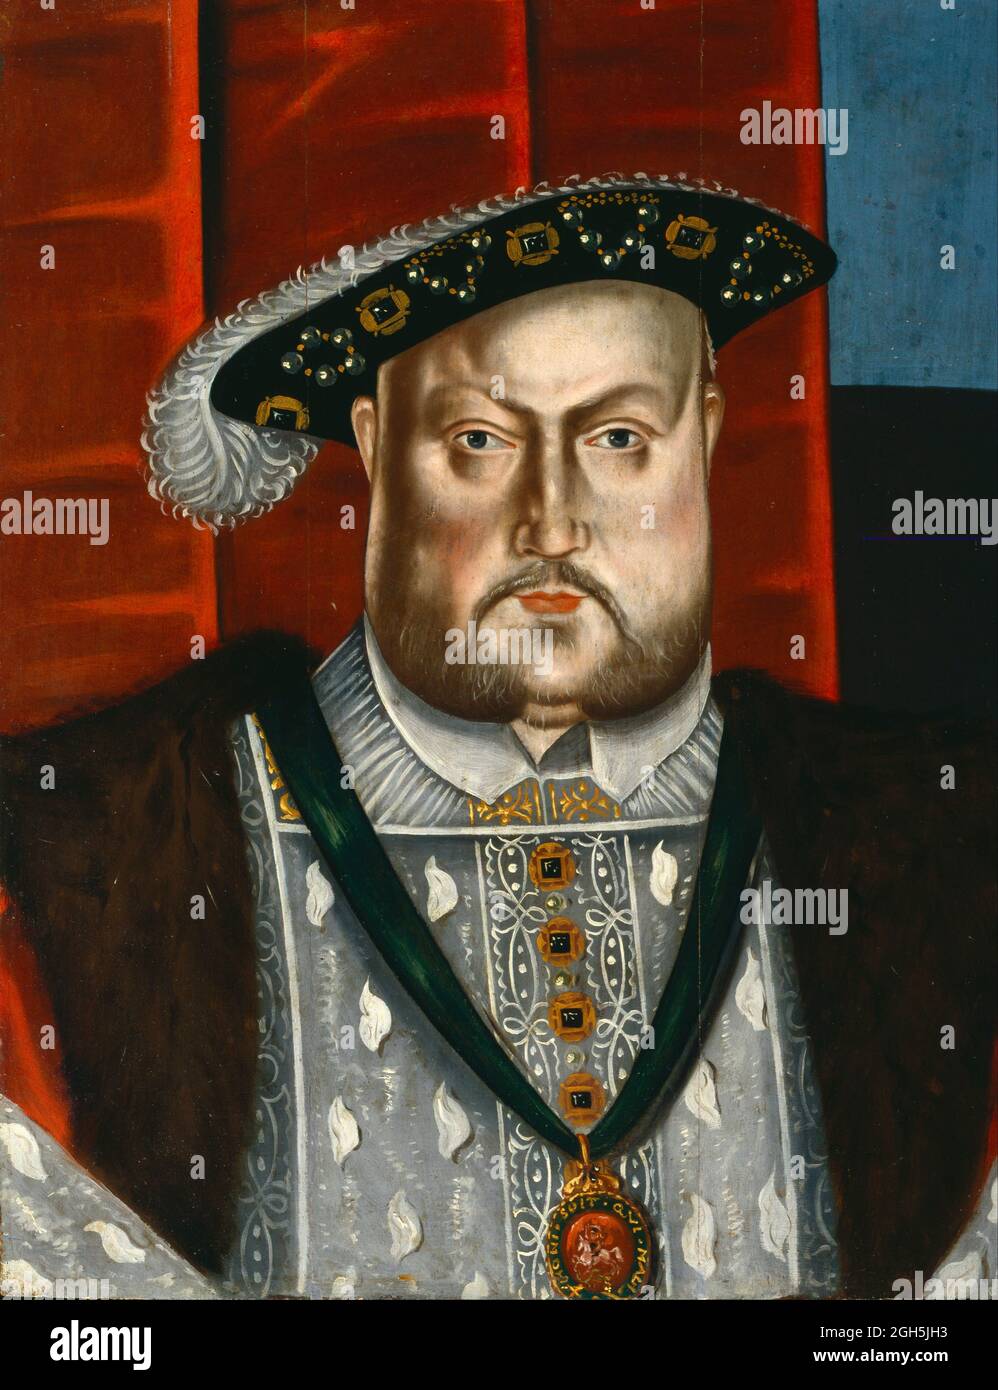 A portrait of King Henry VIII who was King of England from 1509 until 1547 Stock Photo